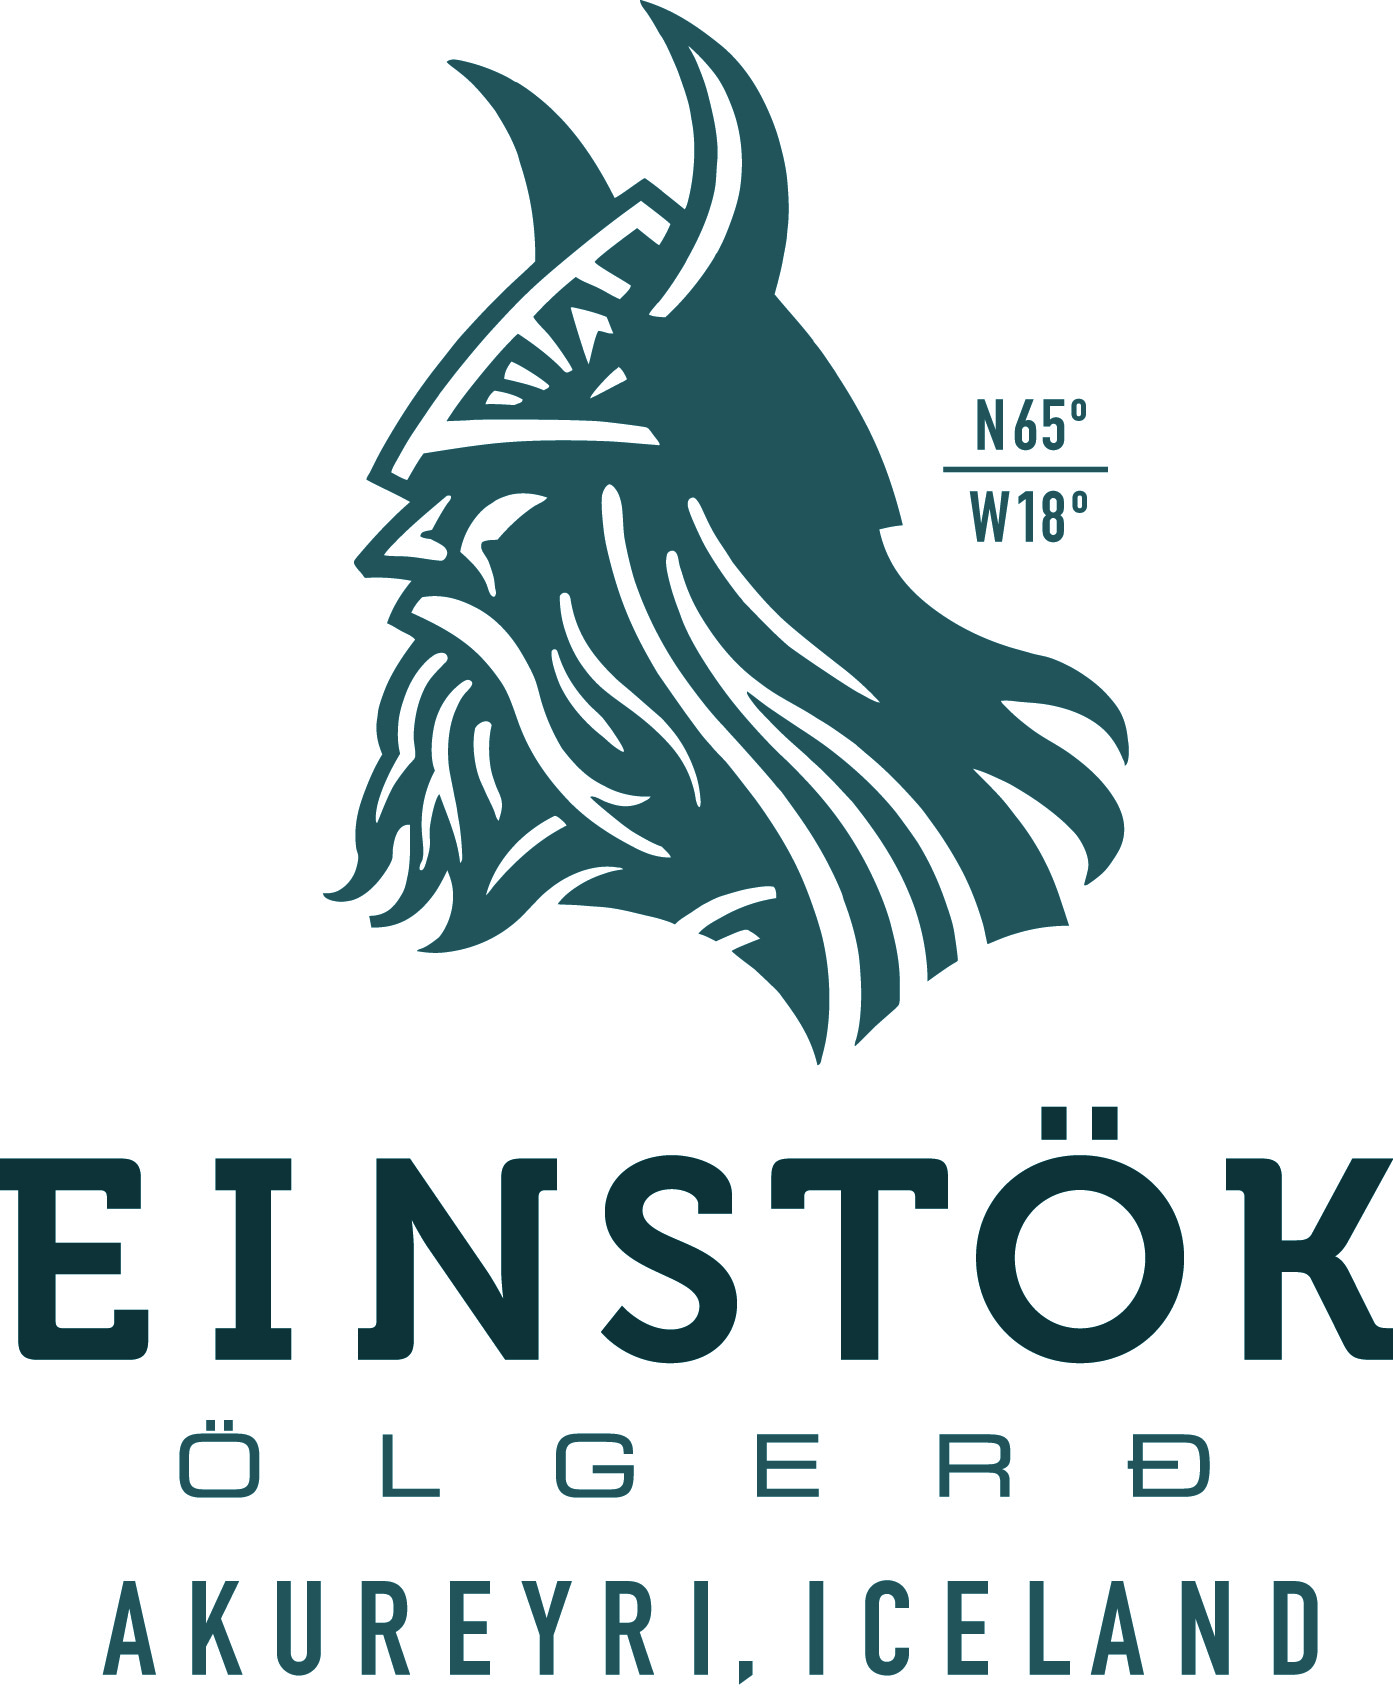 Located just 60 miles south of the Arctic Circle in the fishing port of Akureyri, Iceland, the Einstök Brewery taps the purest water on Earth to create its craft ales.